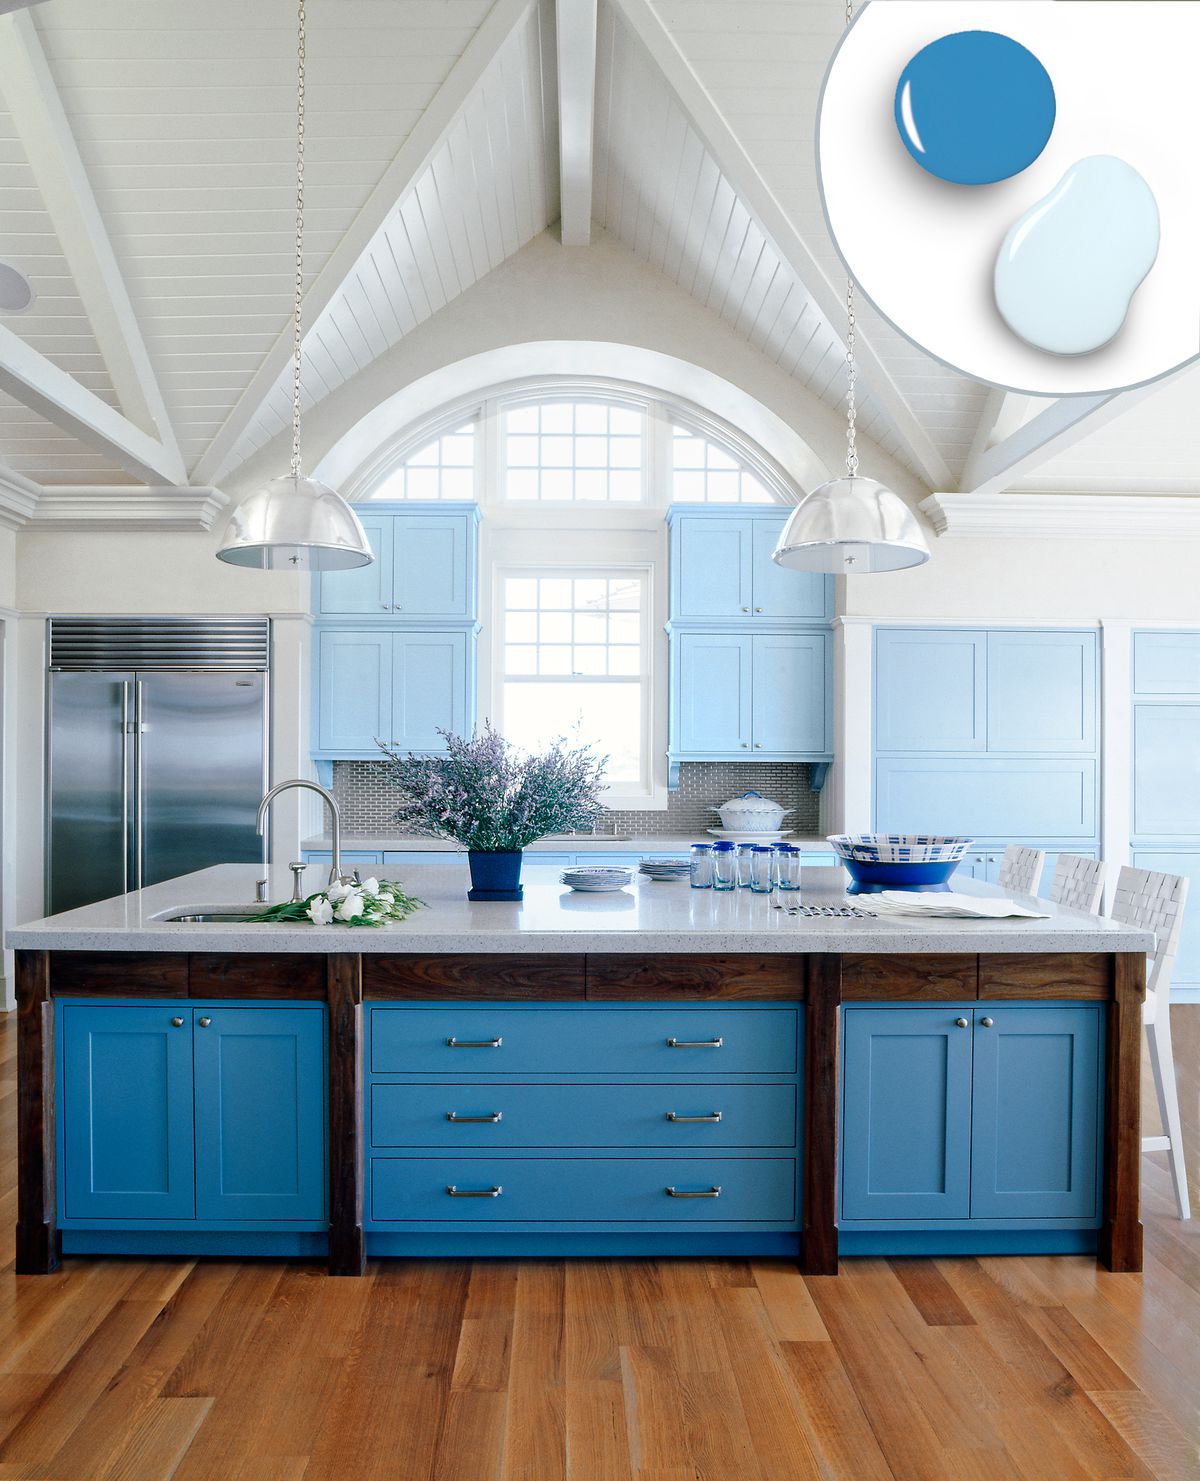 Kitchen island with built-in sky blue drawers and cabinets.